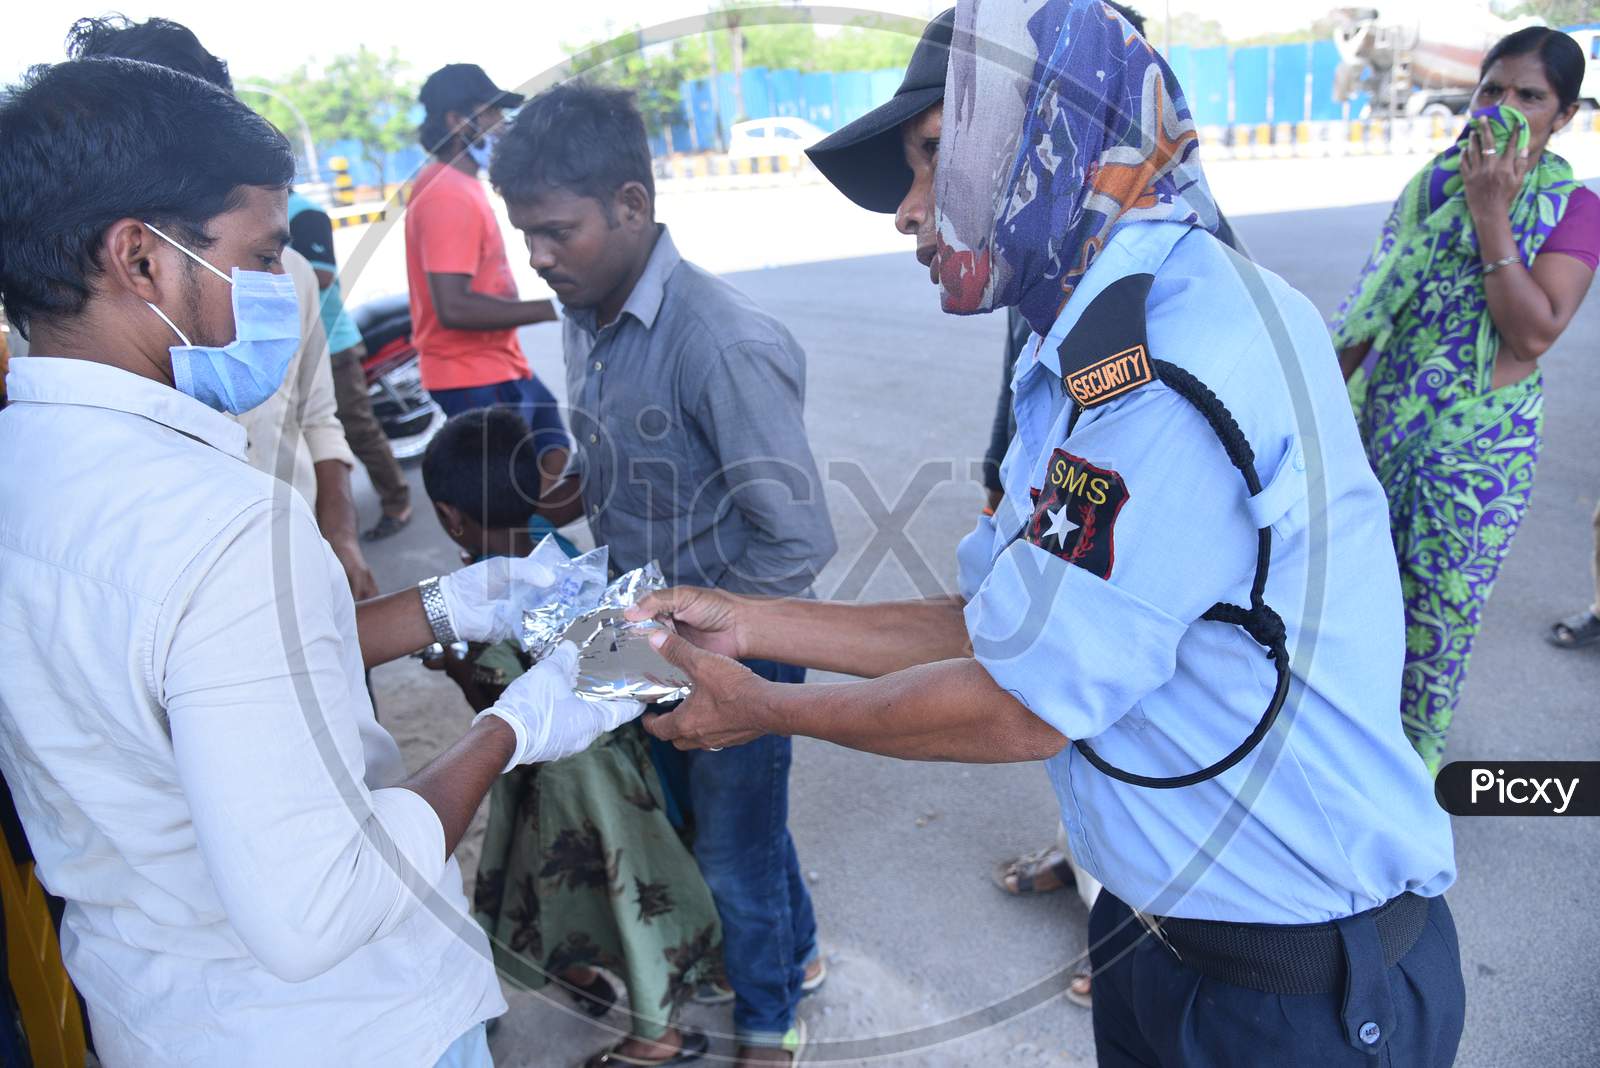 a migrant worker who works as a security guard collects food packets being distributed by some donors as they couldn't find food and work during nationwide lockdown amid coronavirus pandemic, April 8,2020, Hyderabad.